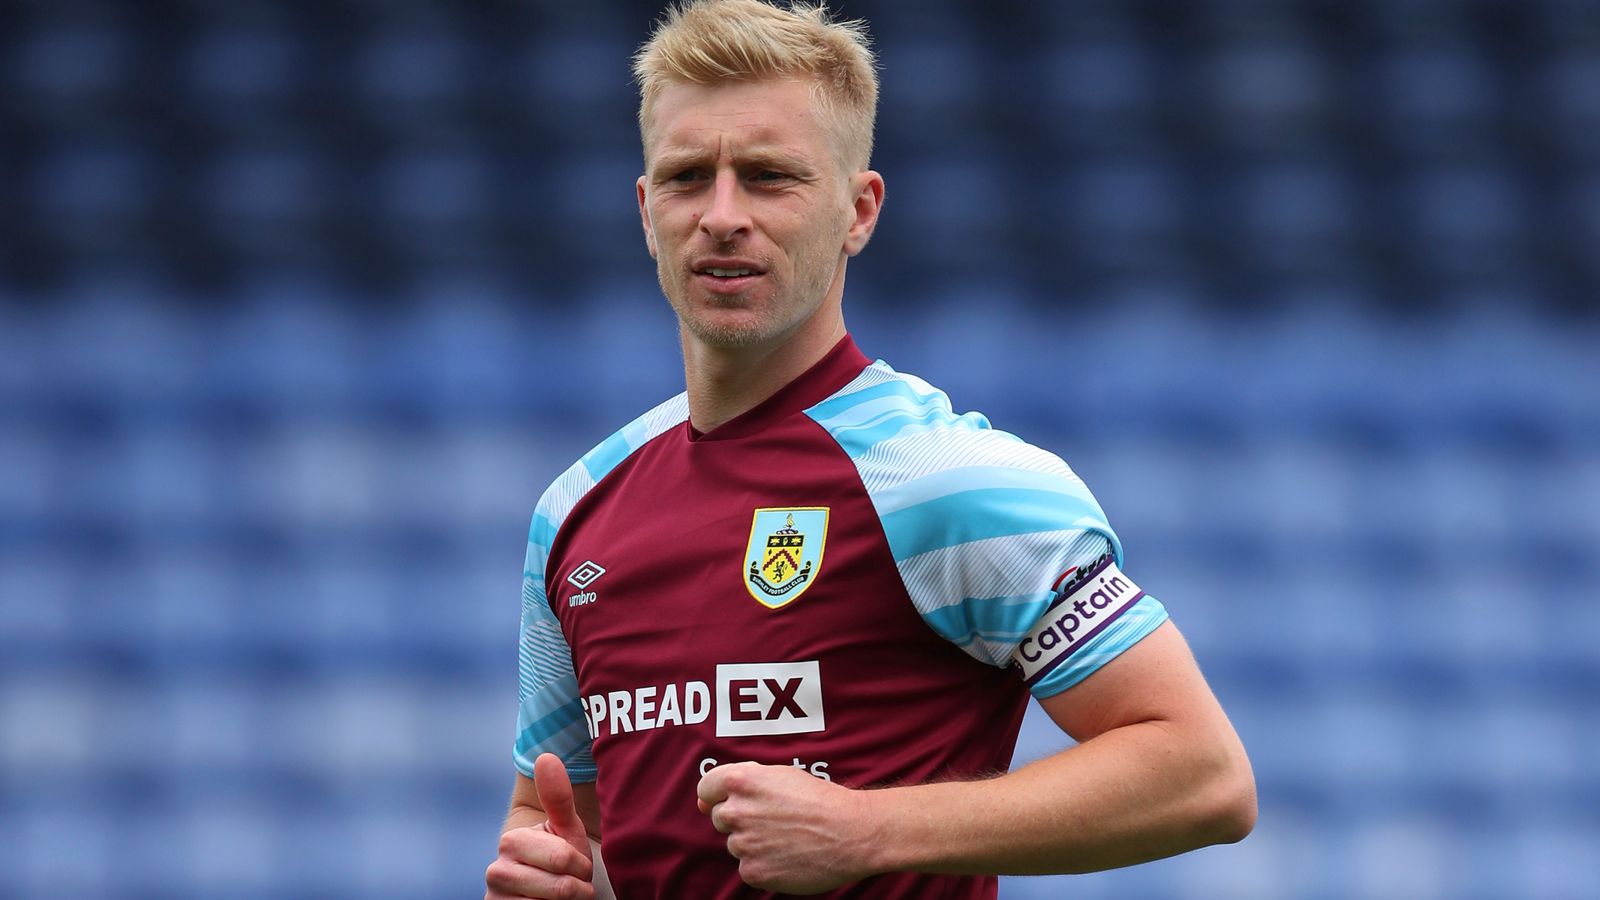 Burnley captain Ben Mee critical of fans who booed players taking a knee | Football News | Sky Sports